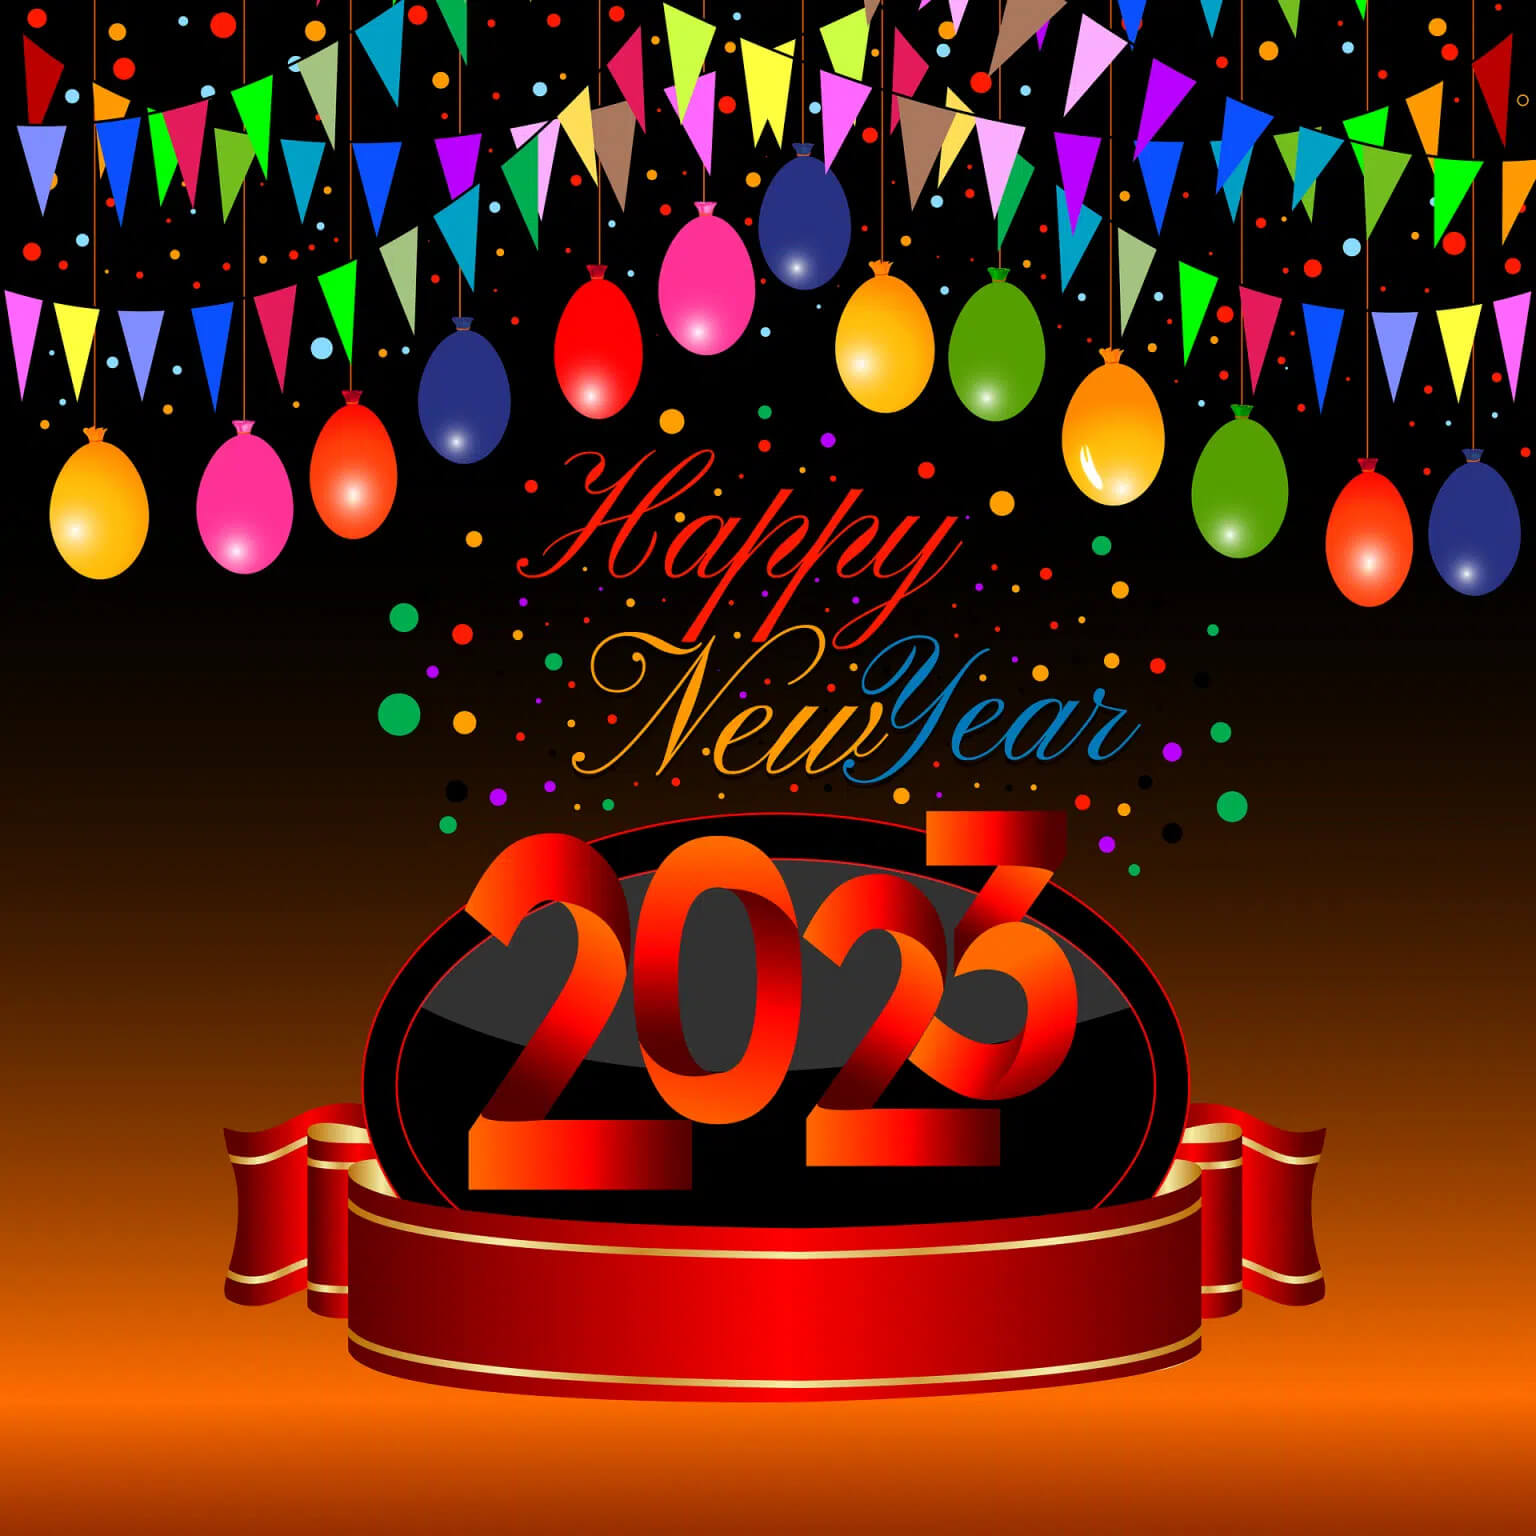 Happy New Year Wishes, Image, Status, Cards, Greeting Download